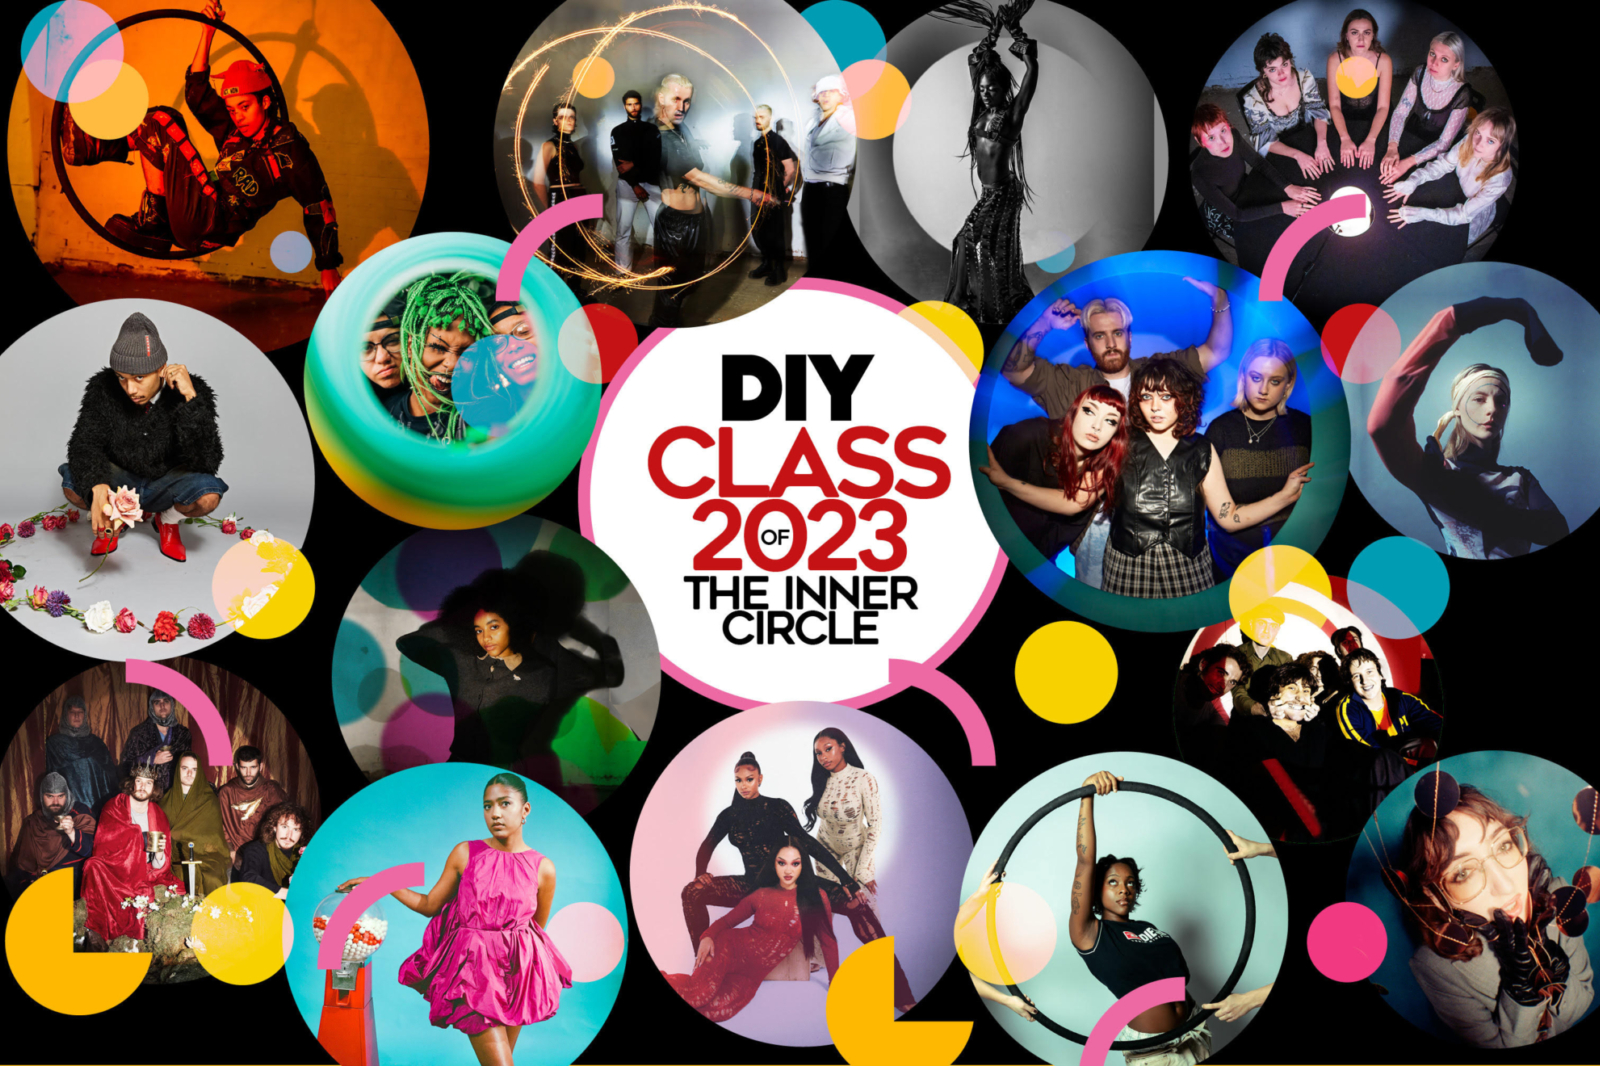 DIY's Class of 2023 issue - feat. Crawlers, FLO, Doechii & more - is out now